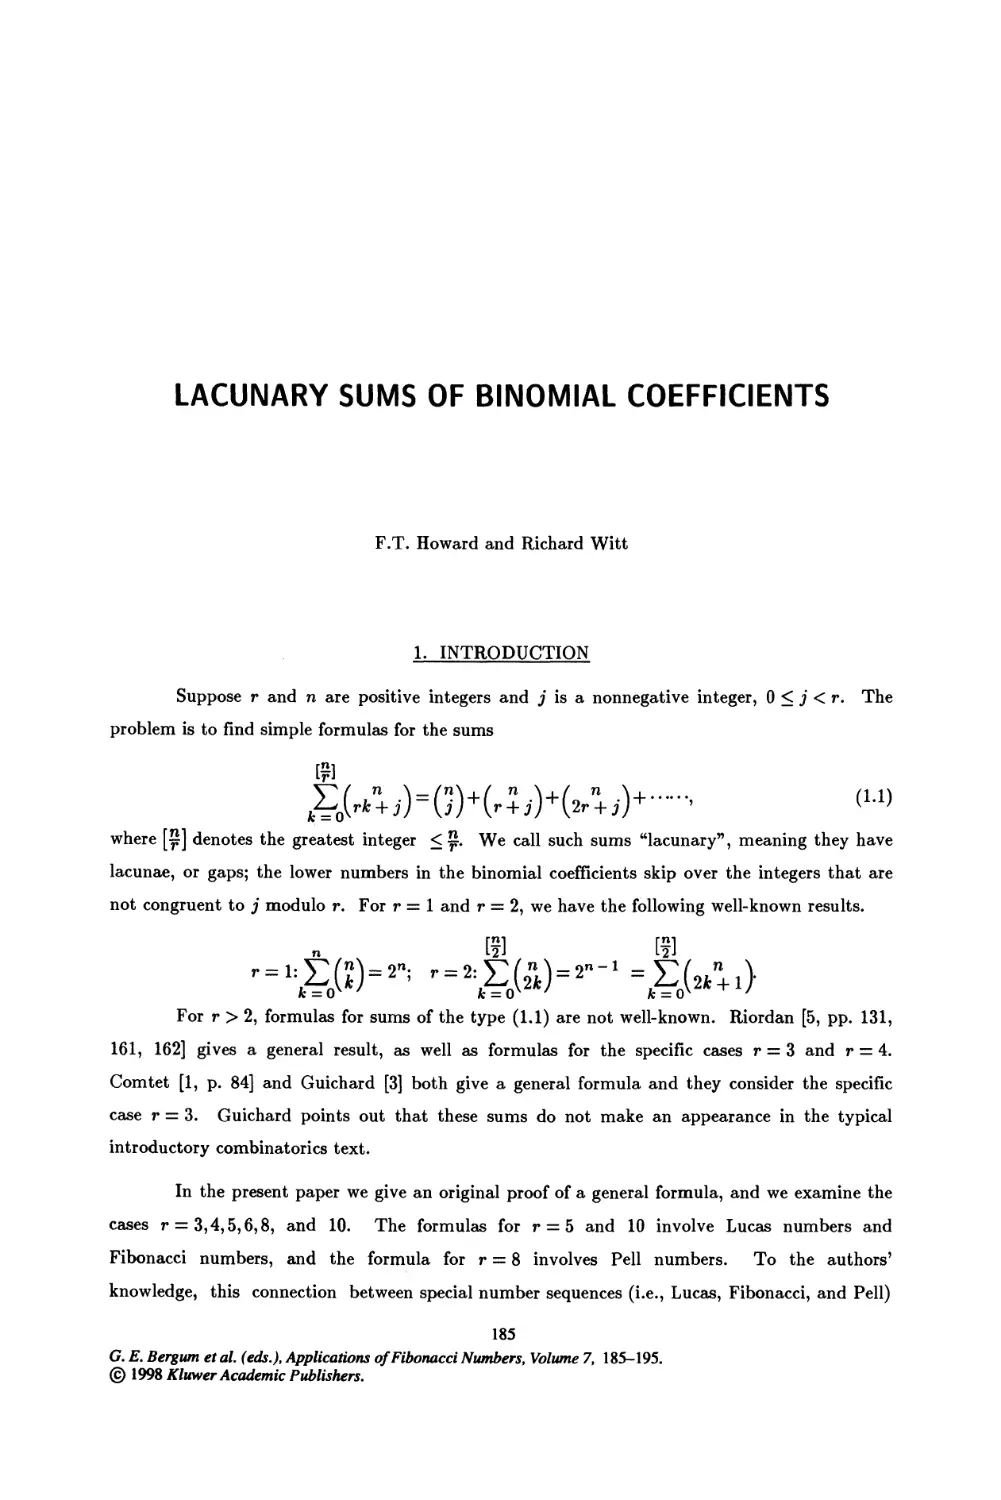 22. Lacunary Sums of Binomial Coefficients